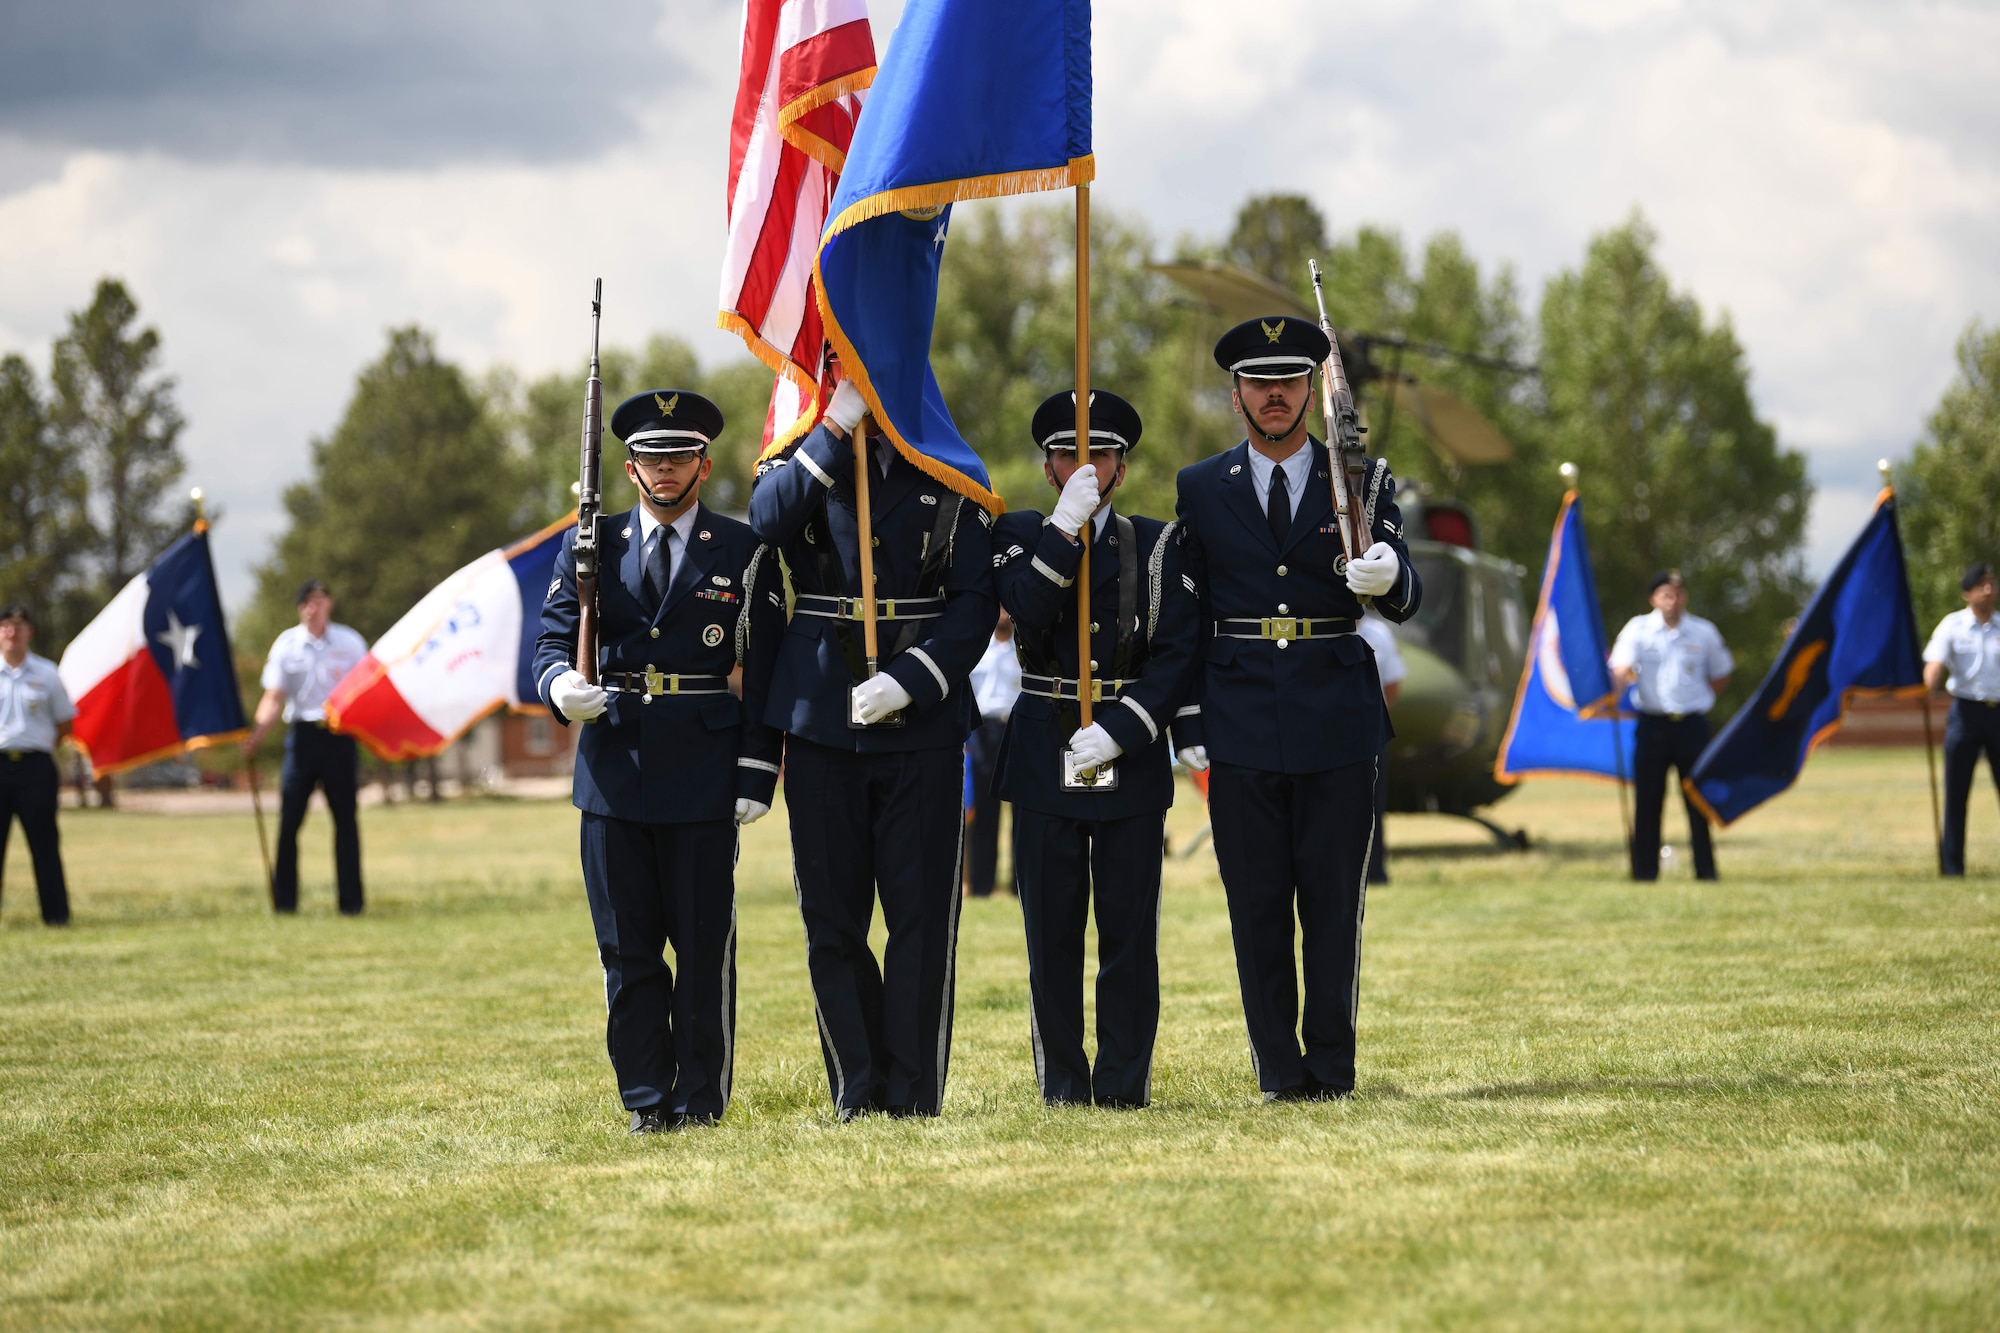 The honor guard stands in formation during the 90 MW change of command ceremony June 28, 2021, F.E. Warren Air Force Base, Wyoming. The ceremony signified the transition of command from Col. Peter Bonetti to Col. Catherine Barrington. (U.S. Air Force photo by Airman 1st Class Darius Frazier)